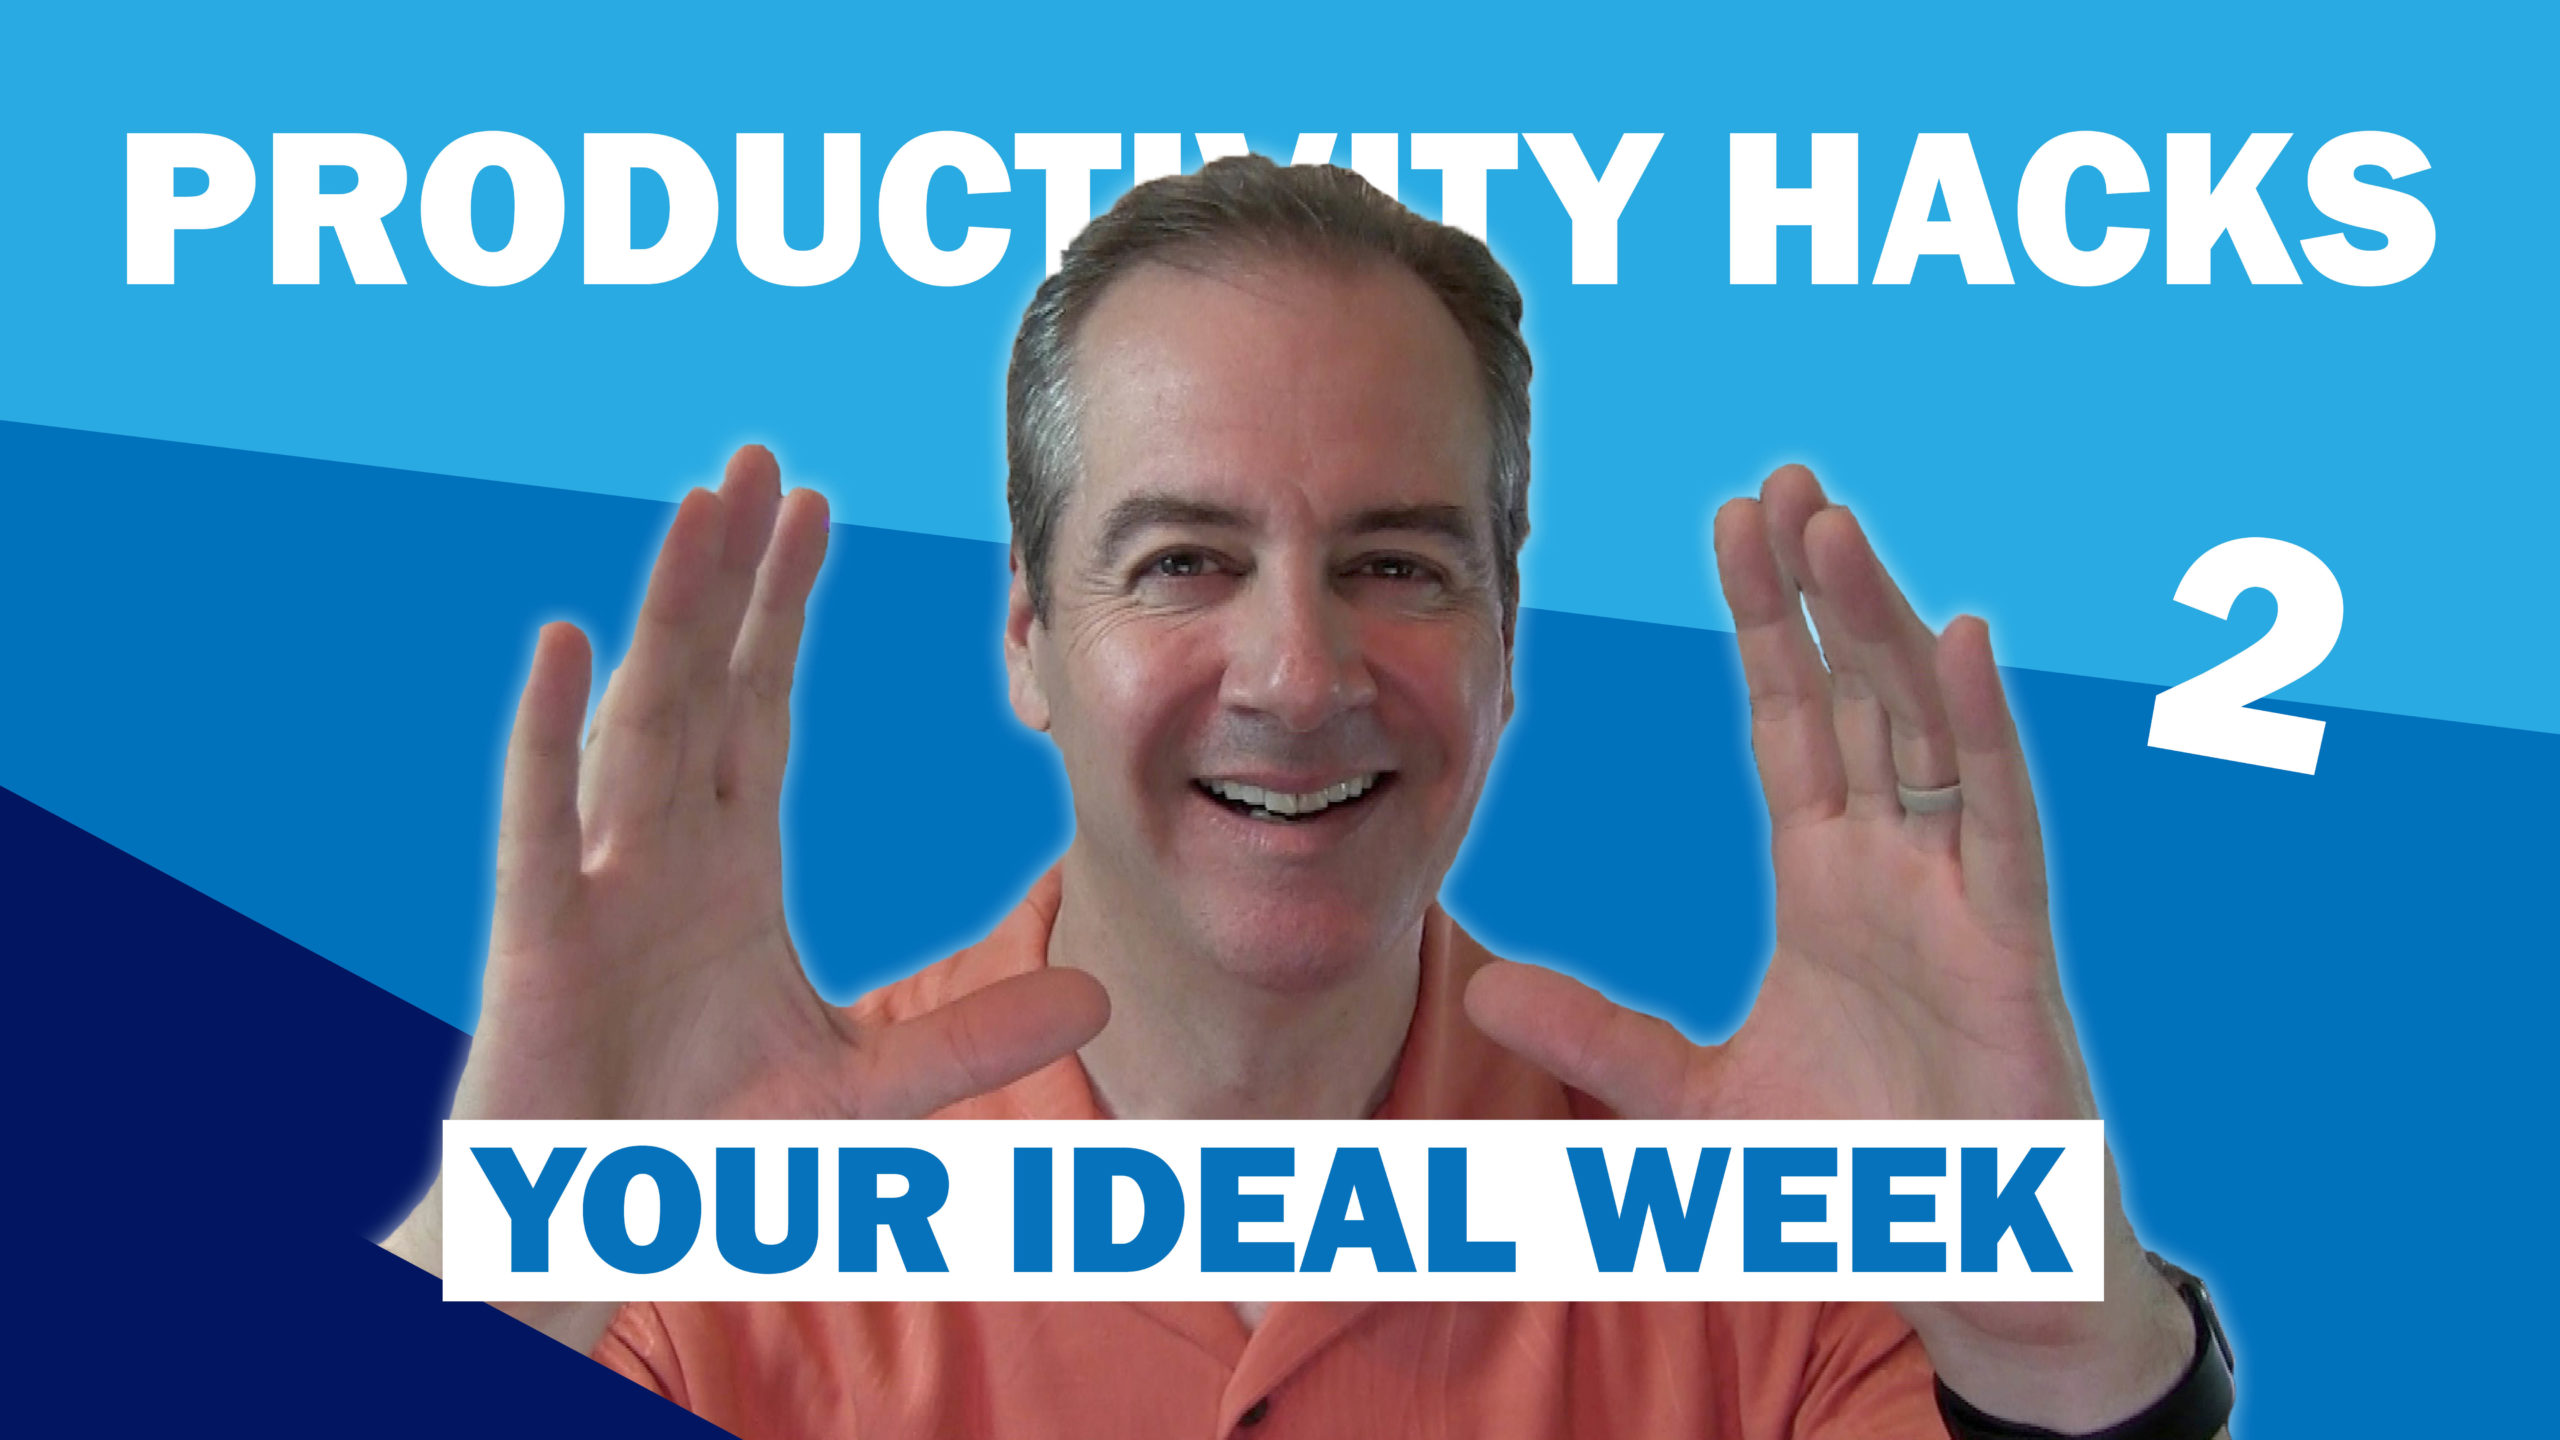 Productivity Hack #2: Your Ideal Week